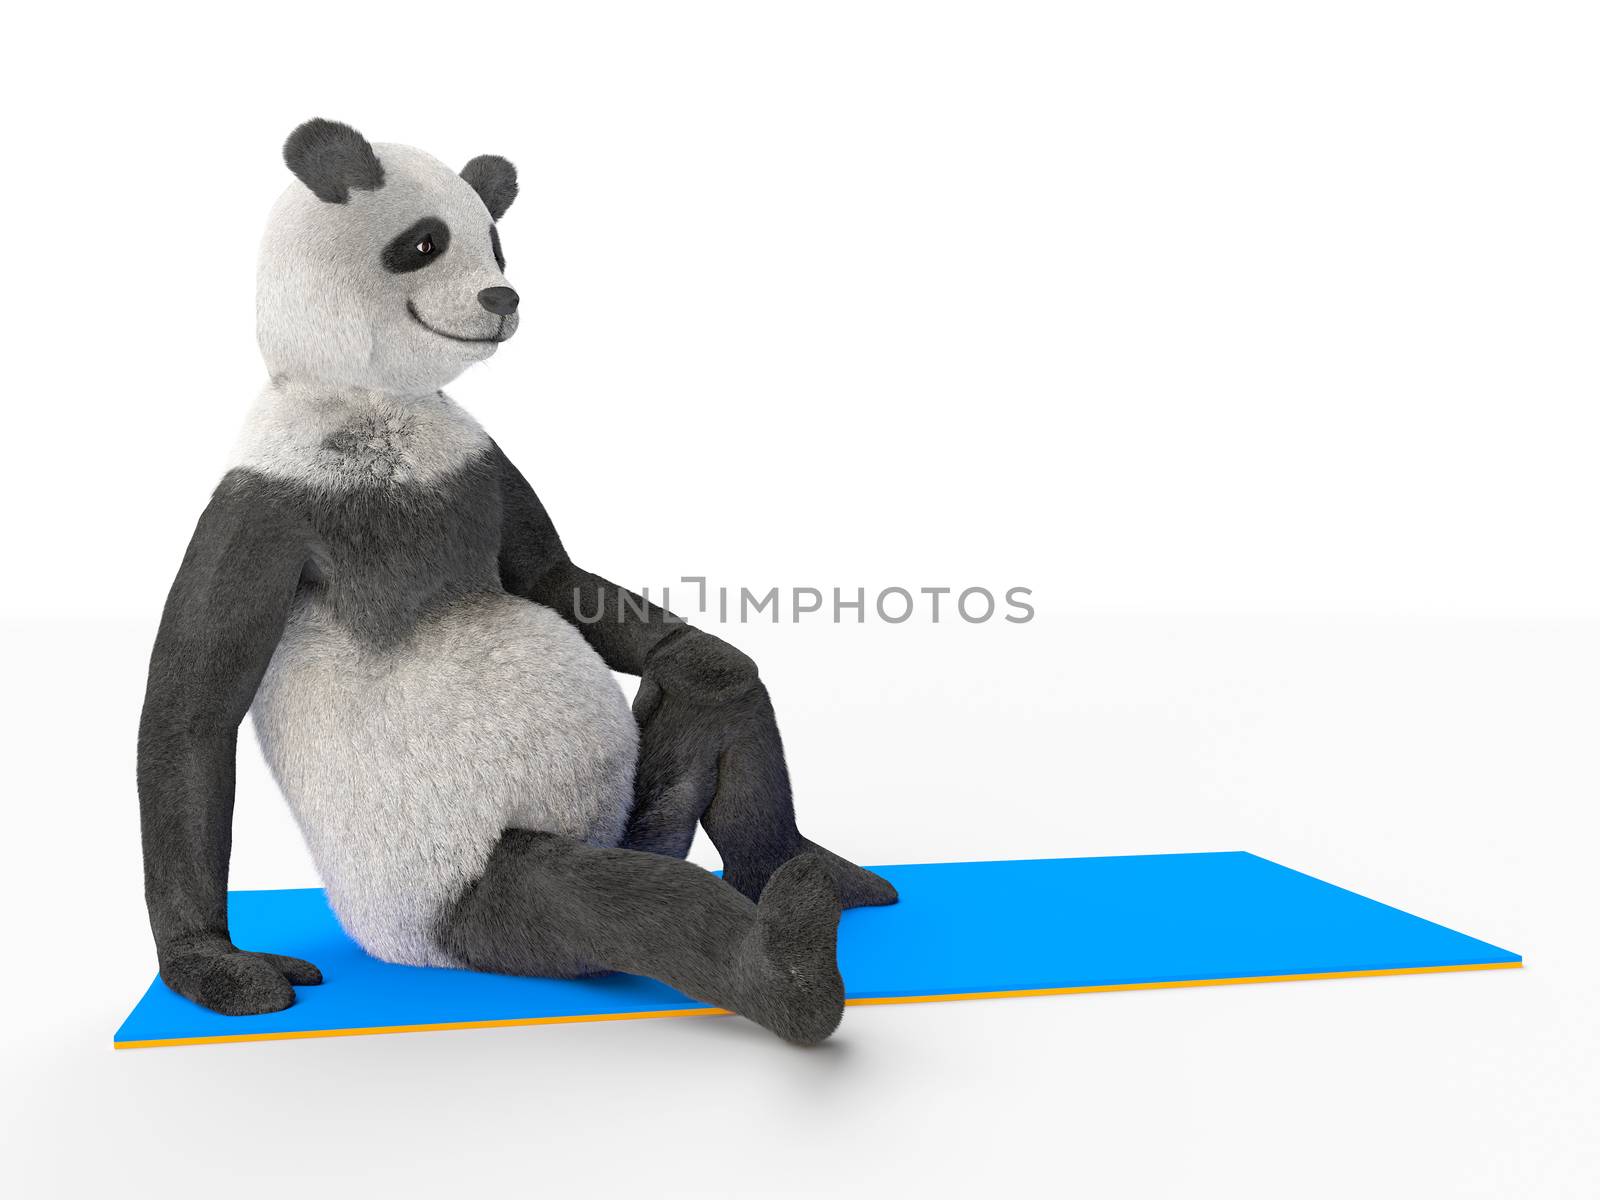 respite and break between sports and yoga. character panda resting after exercise. athlete sits on an ass a blue elastic mat for stretching